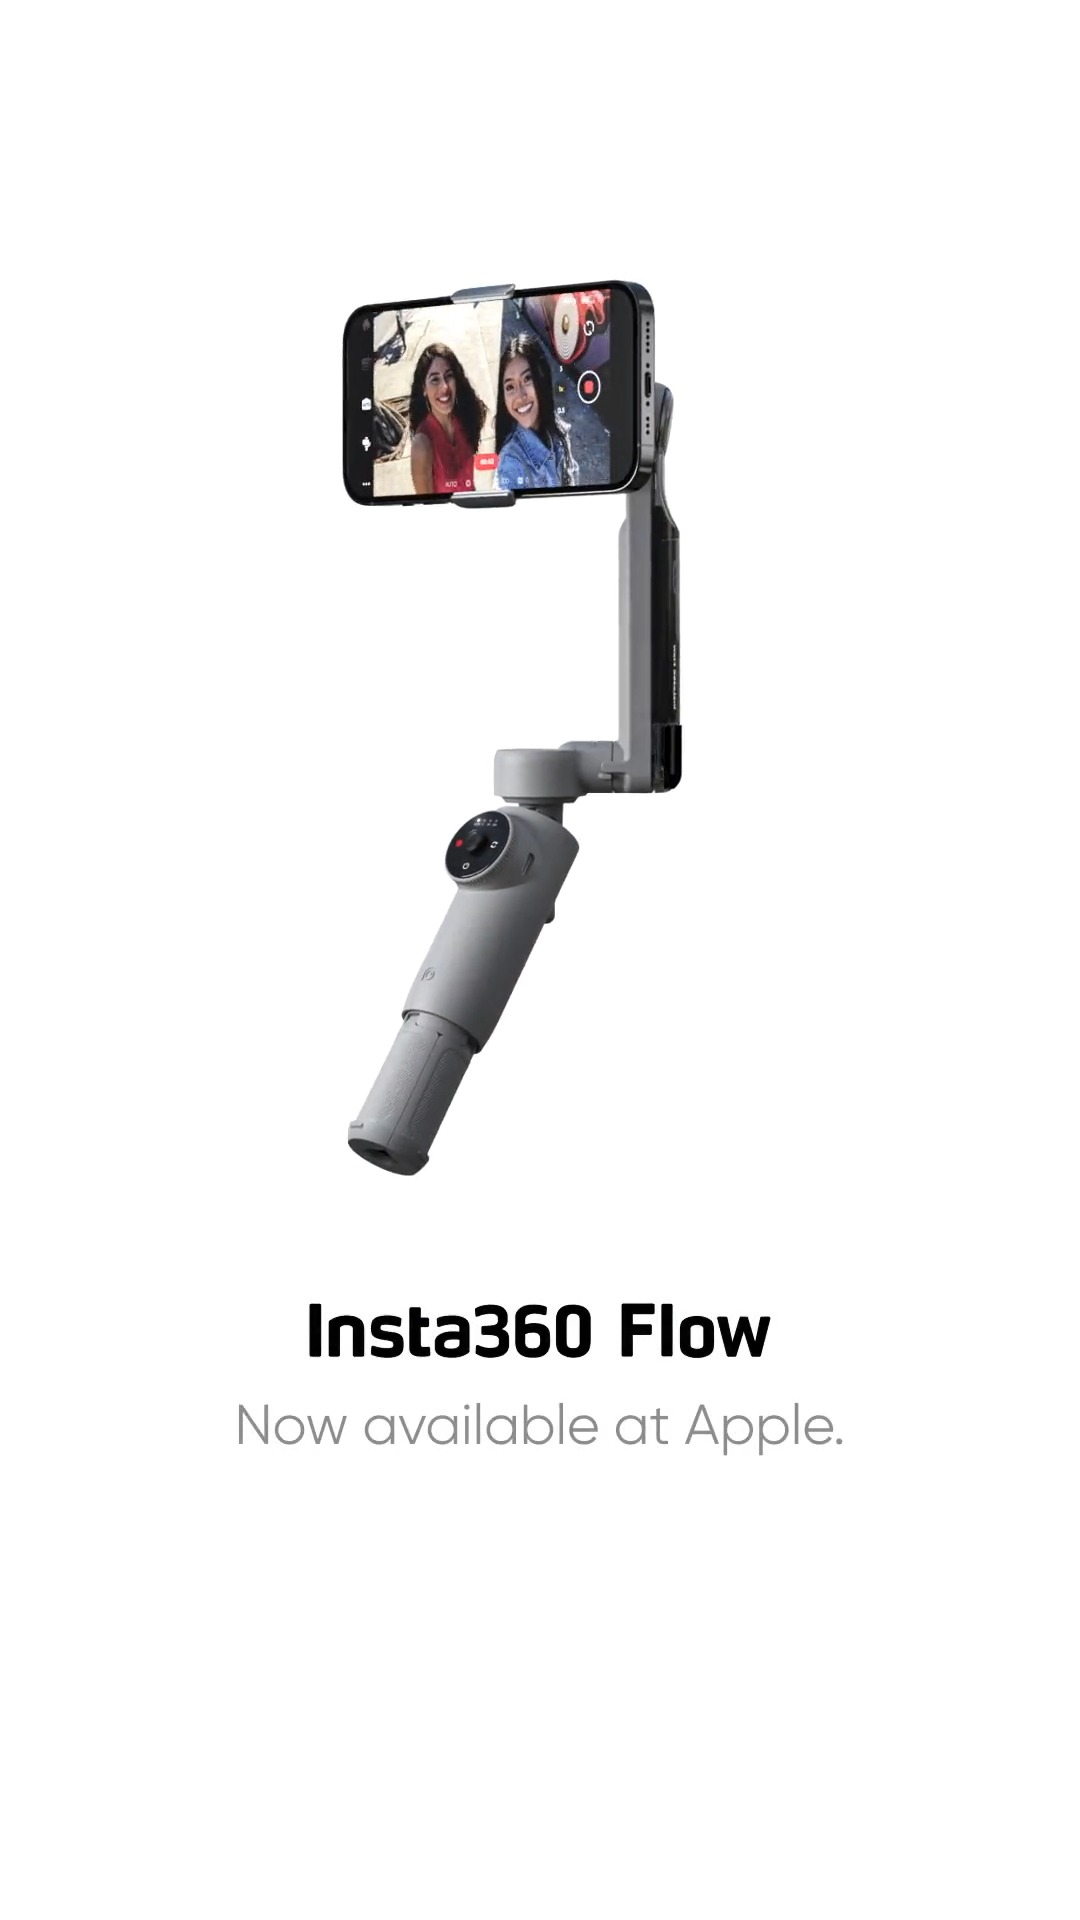 Insta360 on official Canada, now the tracking AI X: Flow New at U.S., Apple Available is stabilizer for in shots. The https://t.co/aGgrV5QLHZ \